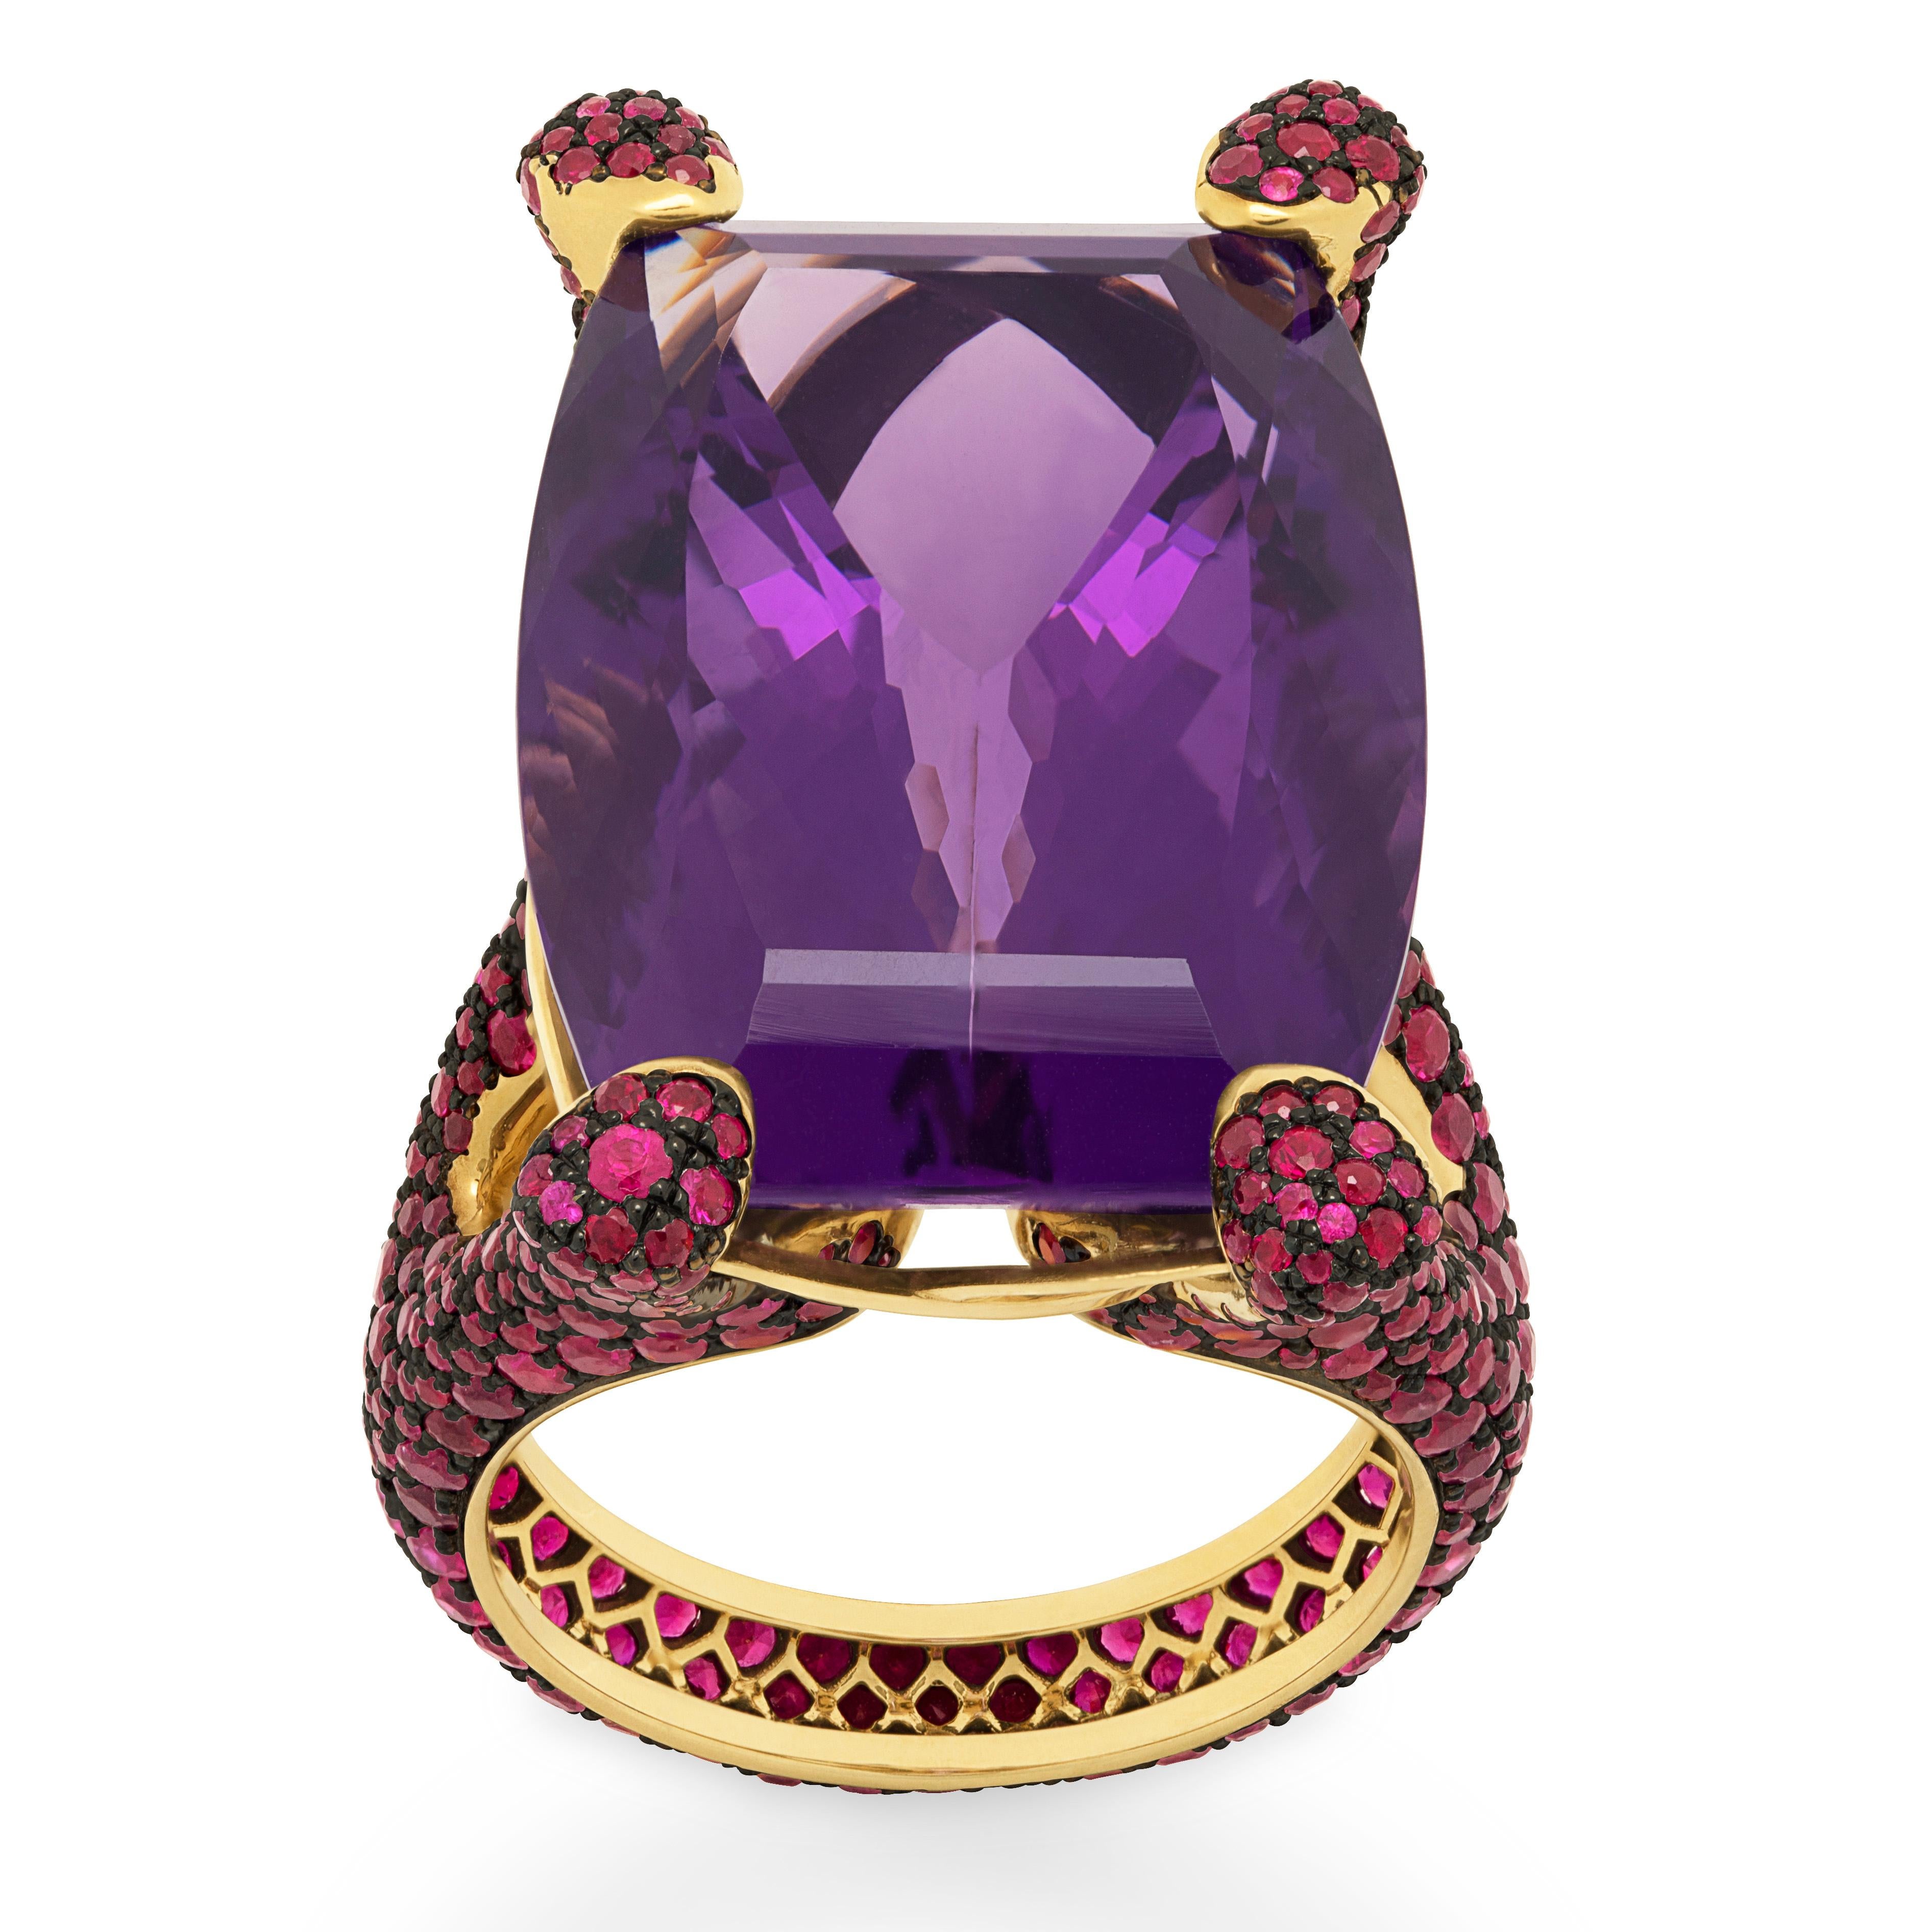 Amethyst 36.85 Carat Ruby 18 Karat Yellow Gold Ring
Highlighting a 36.85 Carat Amethyst and 494 Rubies weighing 5.43 Carats are mounted on an 18 Karat Gold lined with black rhodium. It displays a riveting interplay of contrast surfaces with the